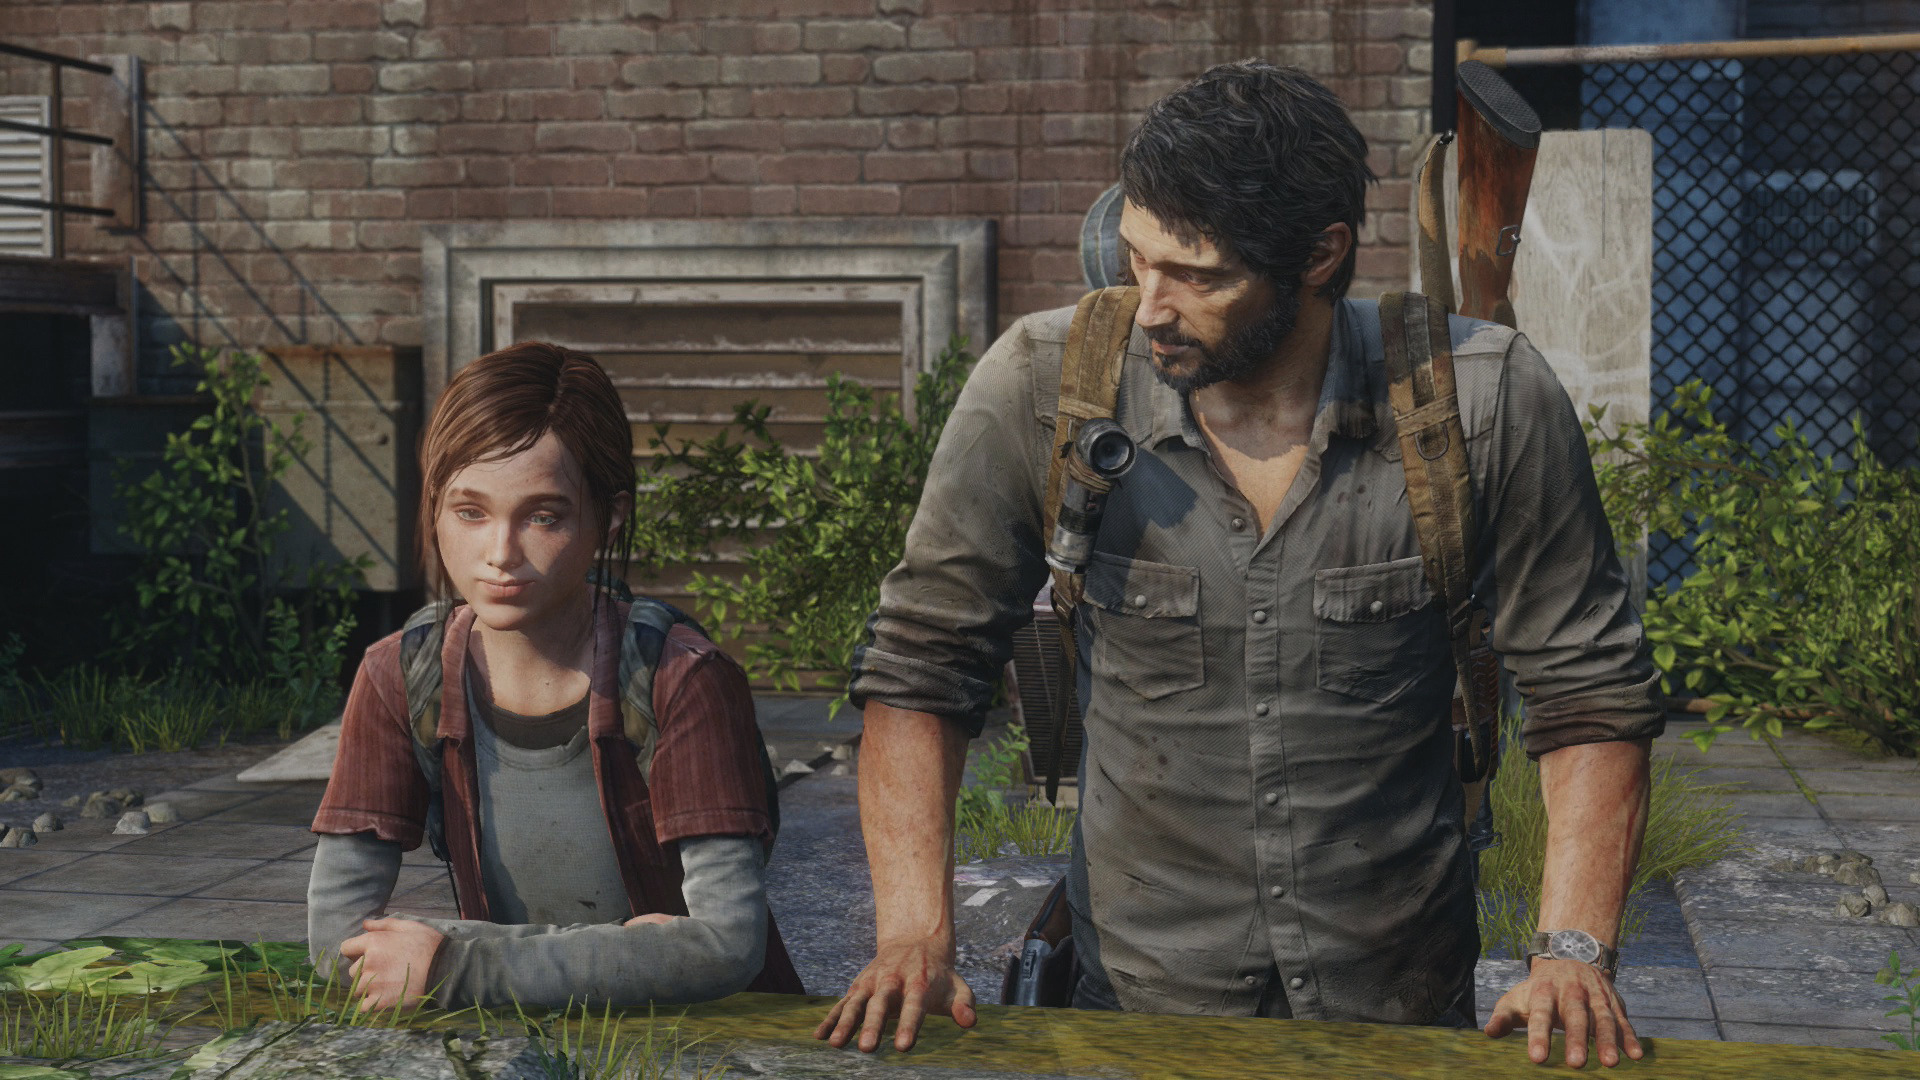 The Last of Us: Remastered